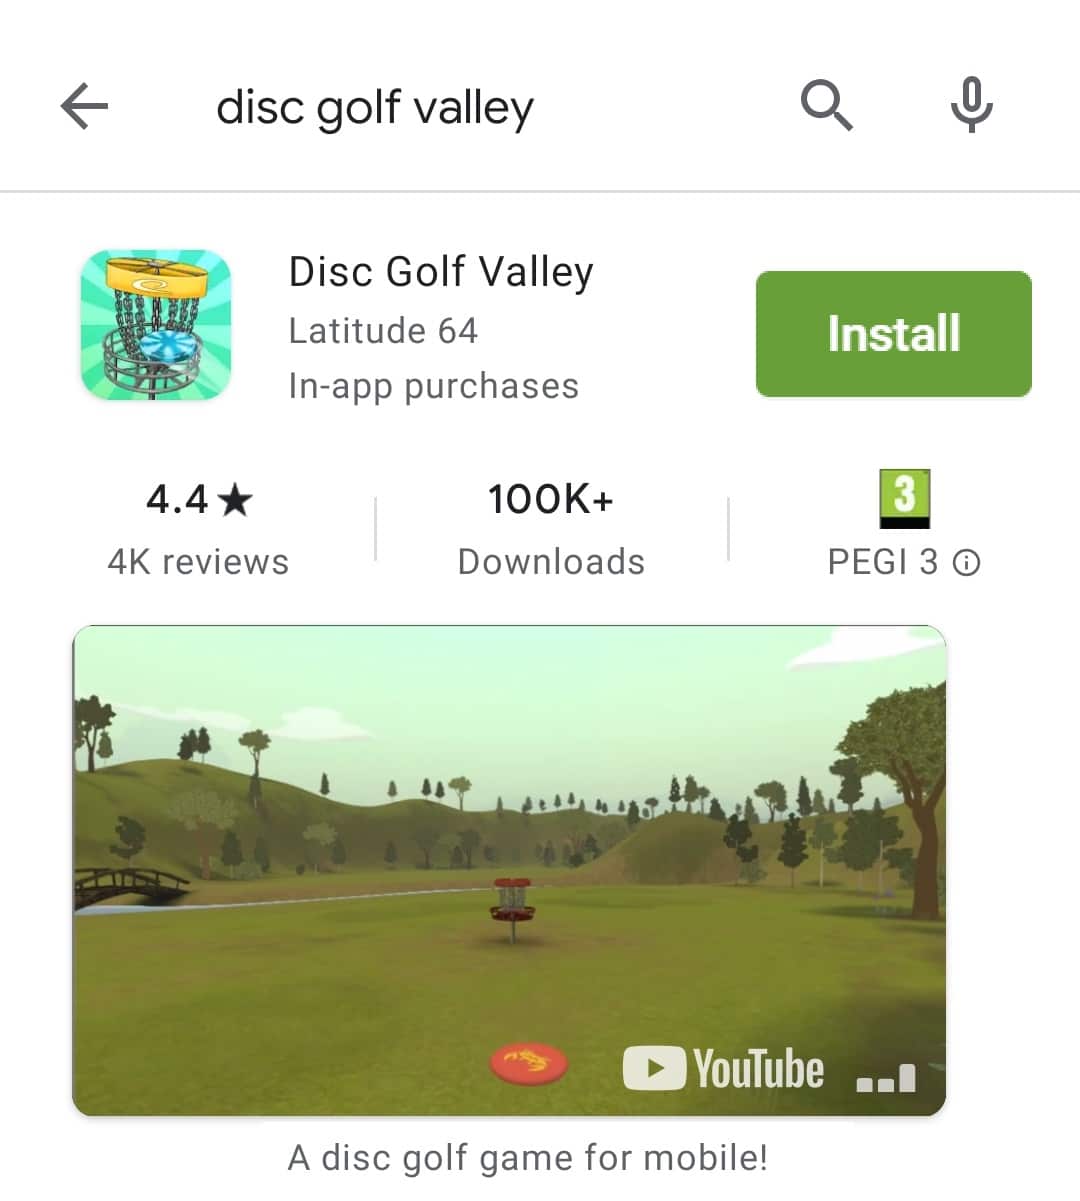 Disc Golf Valley in the google play store